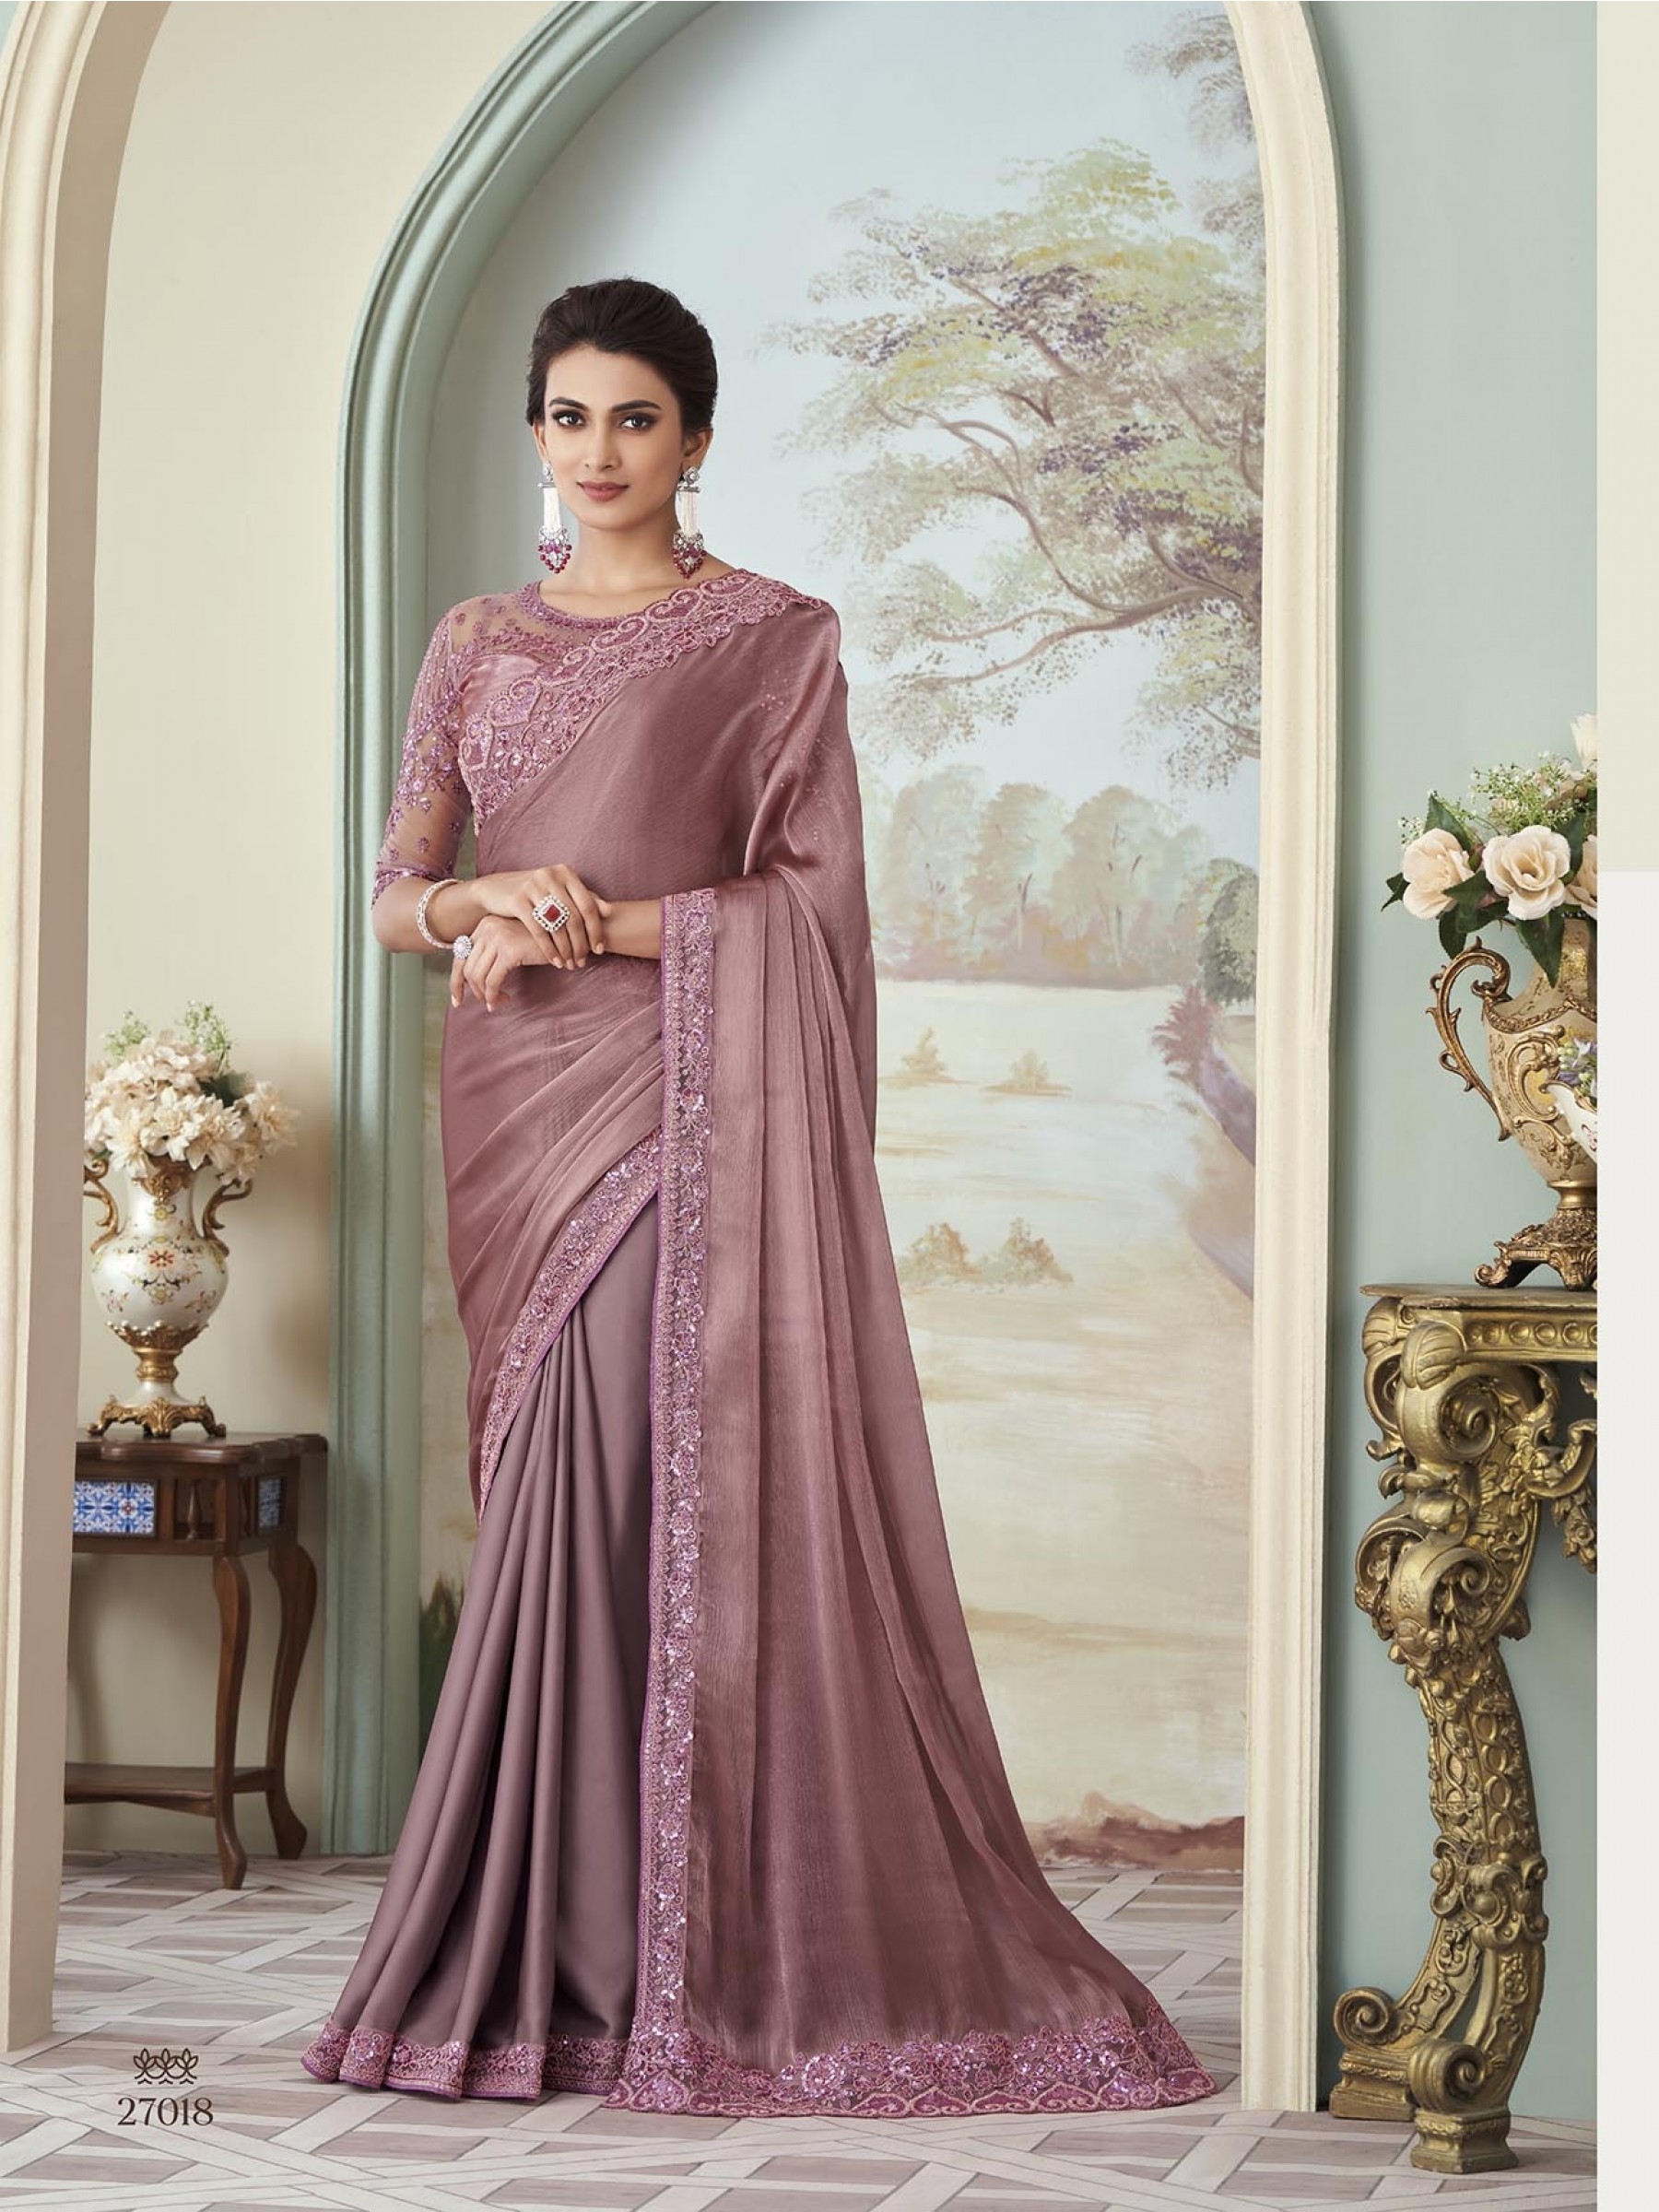 Simmer Silk  Saree  Pink Color With Embroidery Work